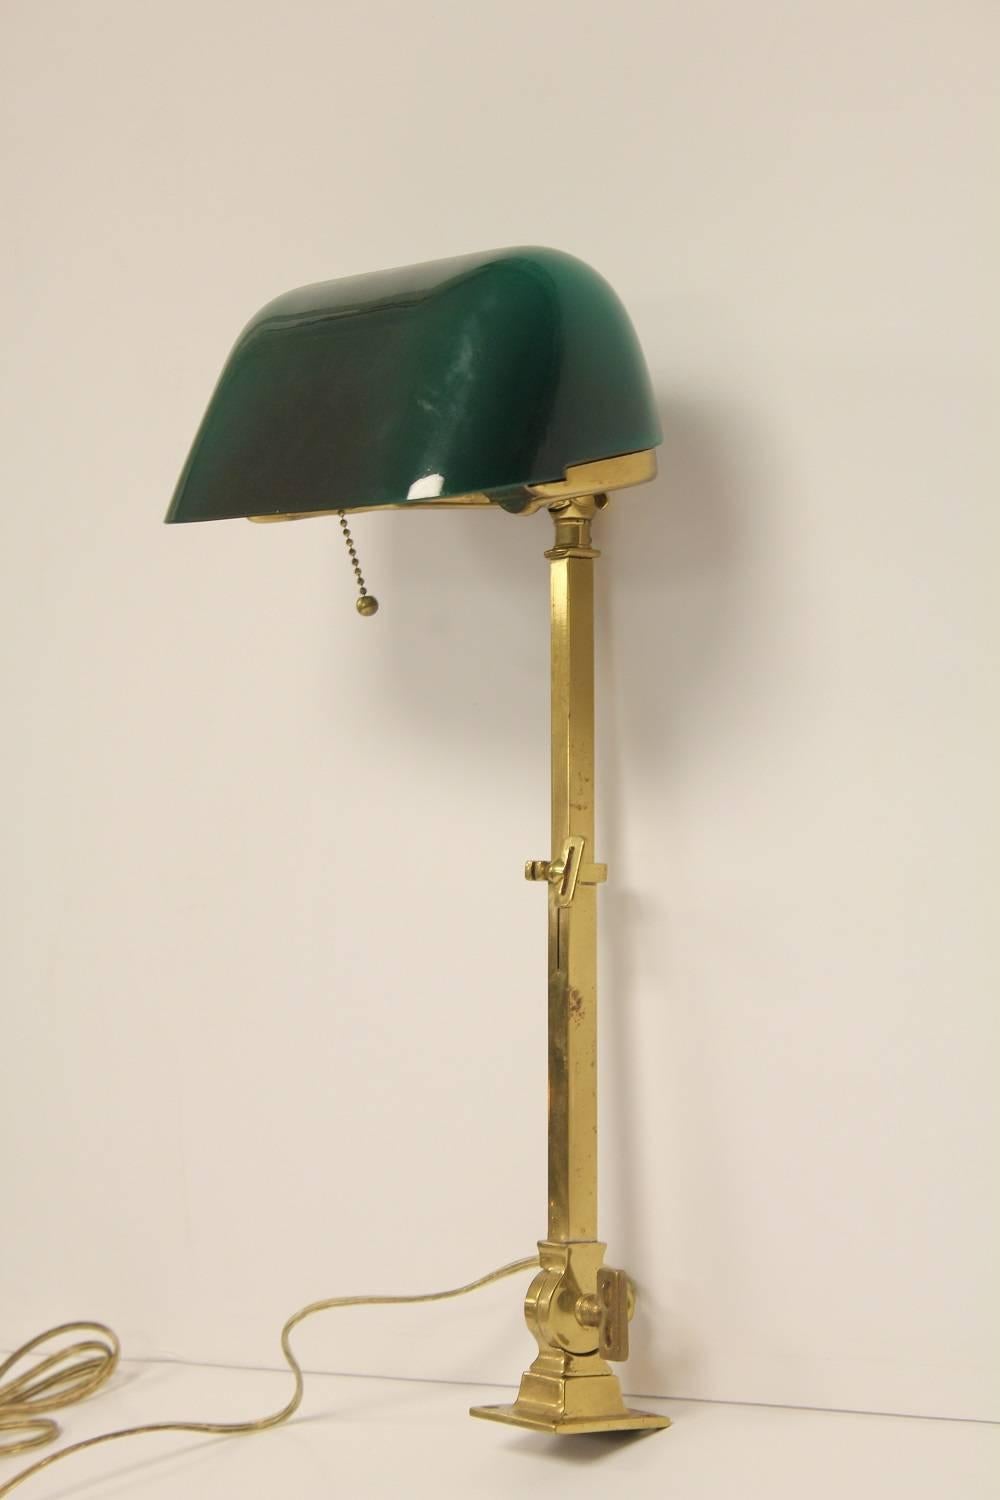 emeralite lamp for sale